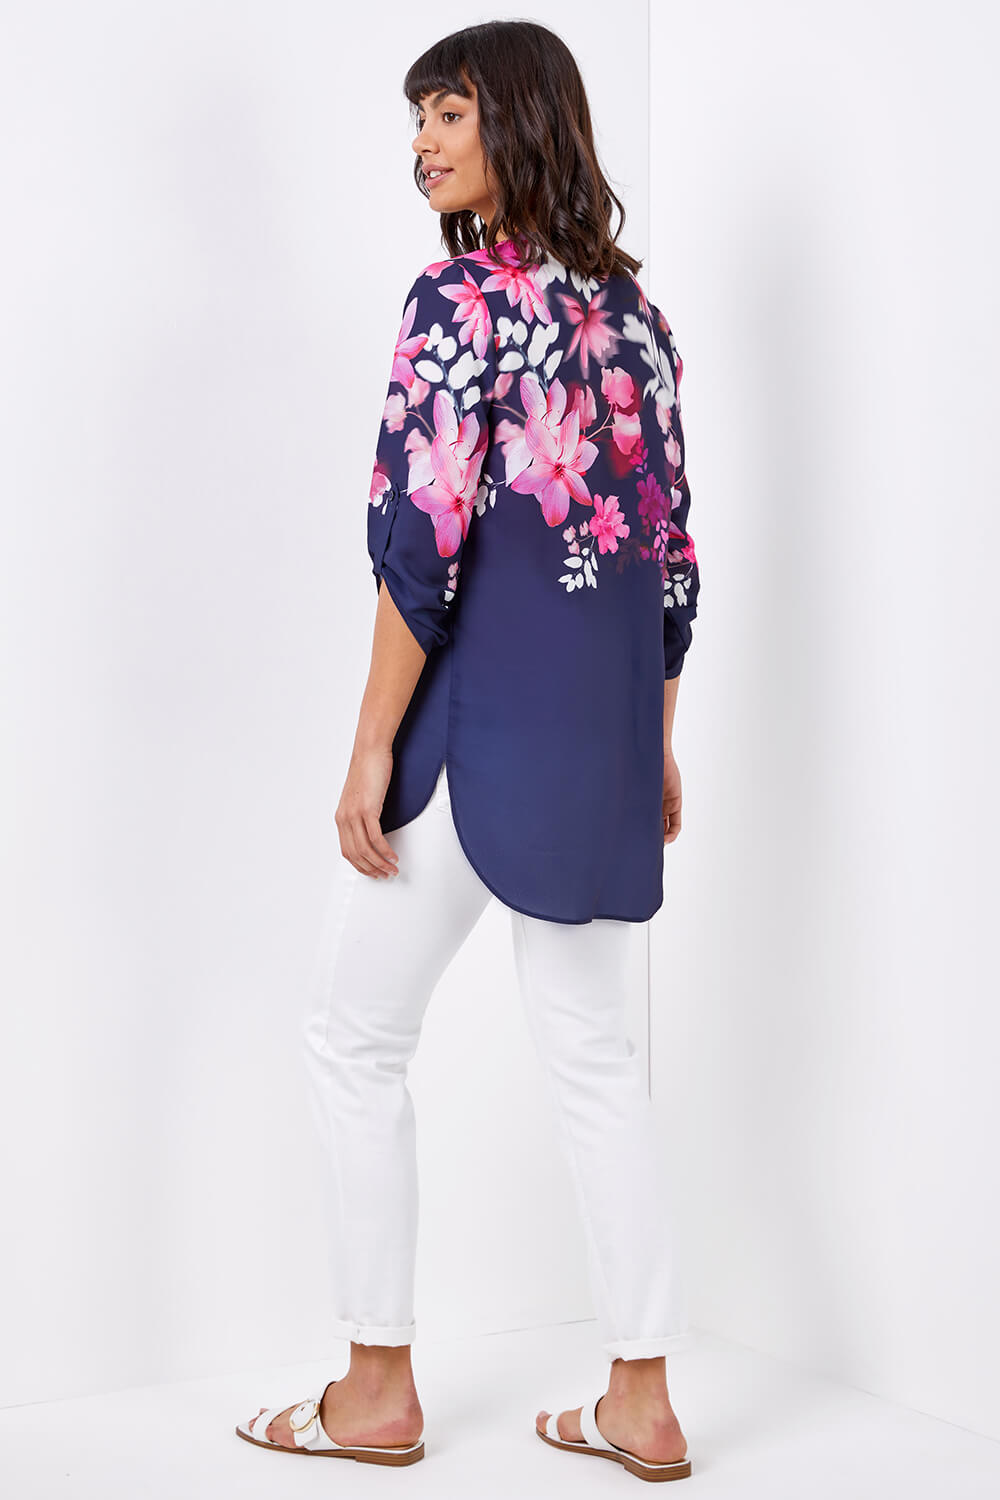 Navy  Floral Print Button Down Top, Image 2 of 4